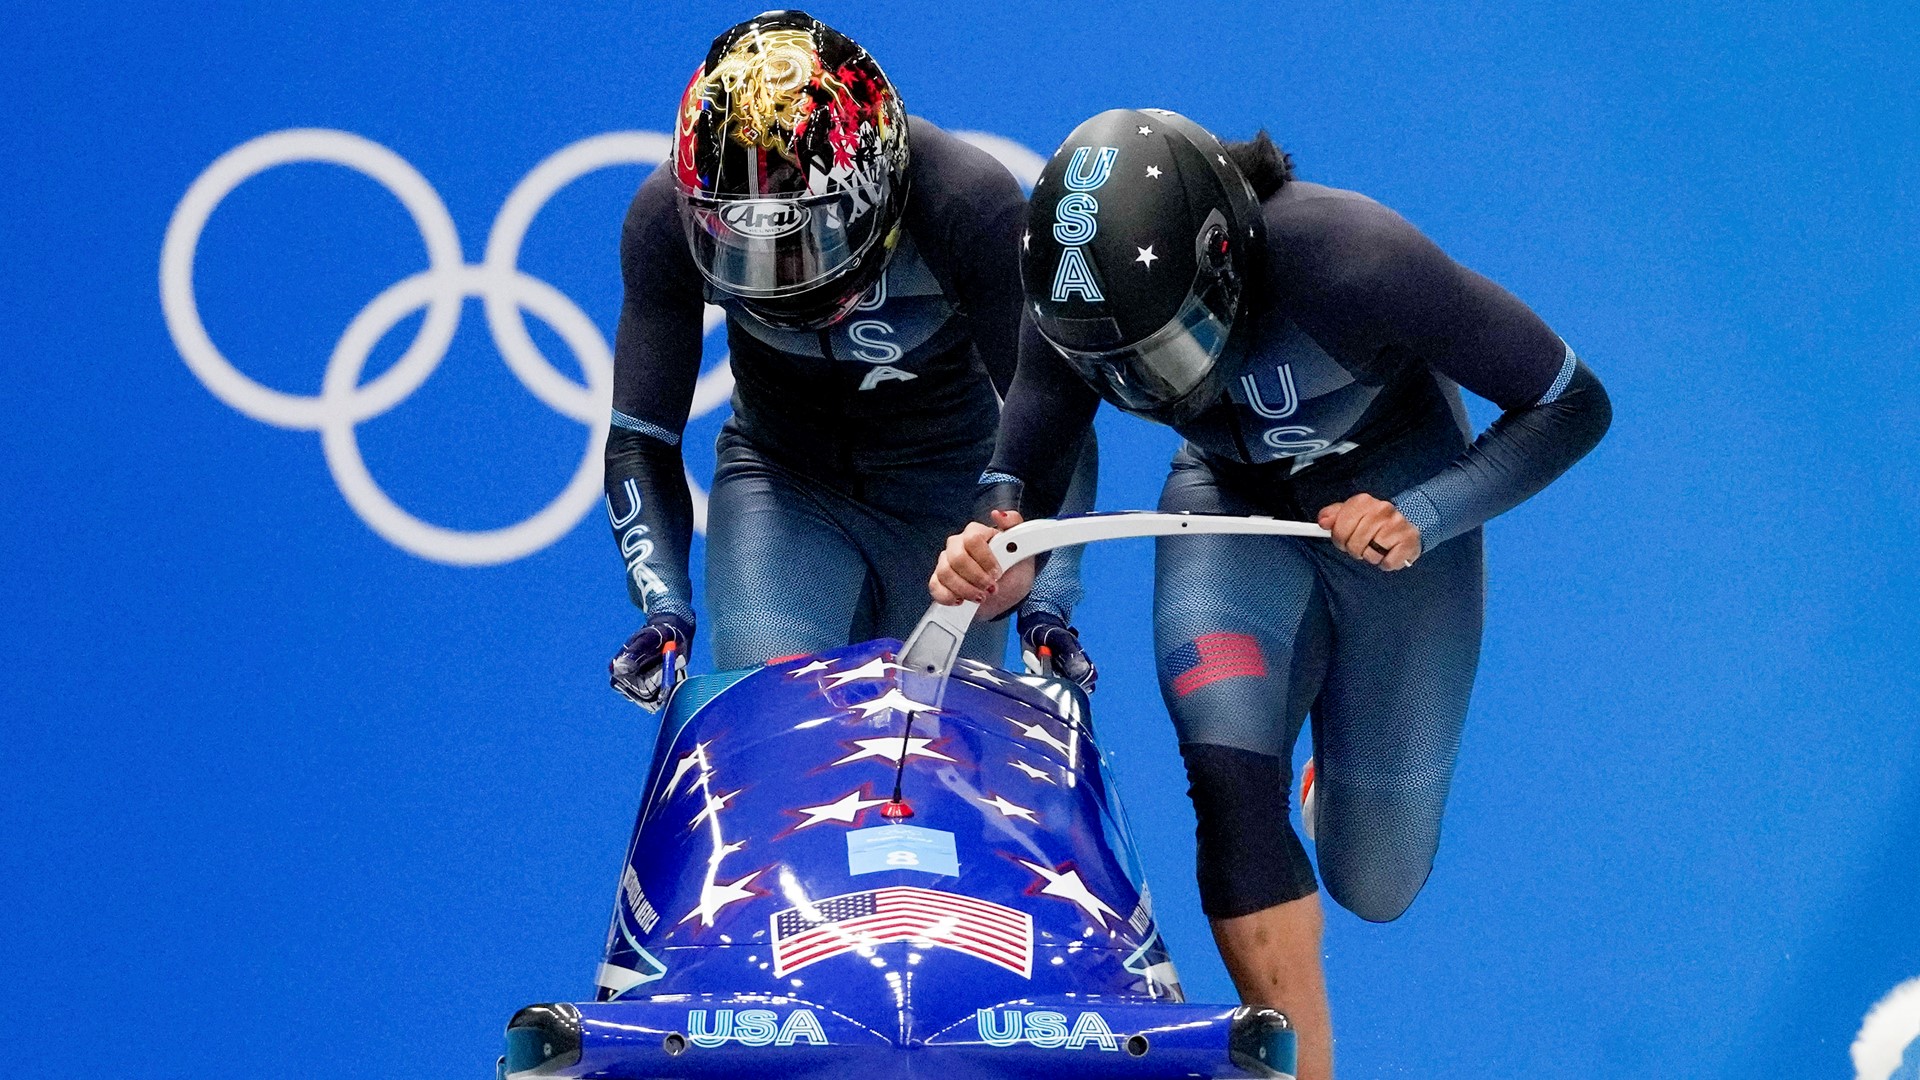 The final U.S. medals of the Beijing Winter Olympics go to a history-making bobsledder and a cross-country racer who's quickly becoming a legend.